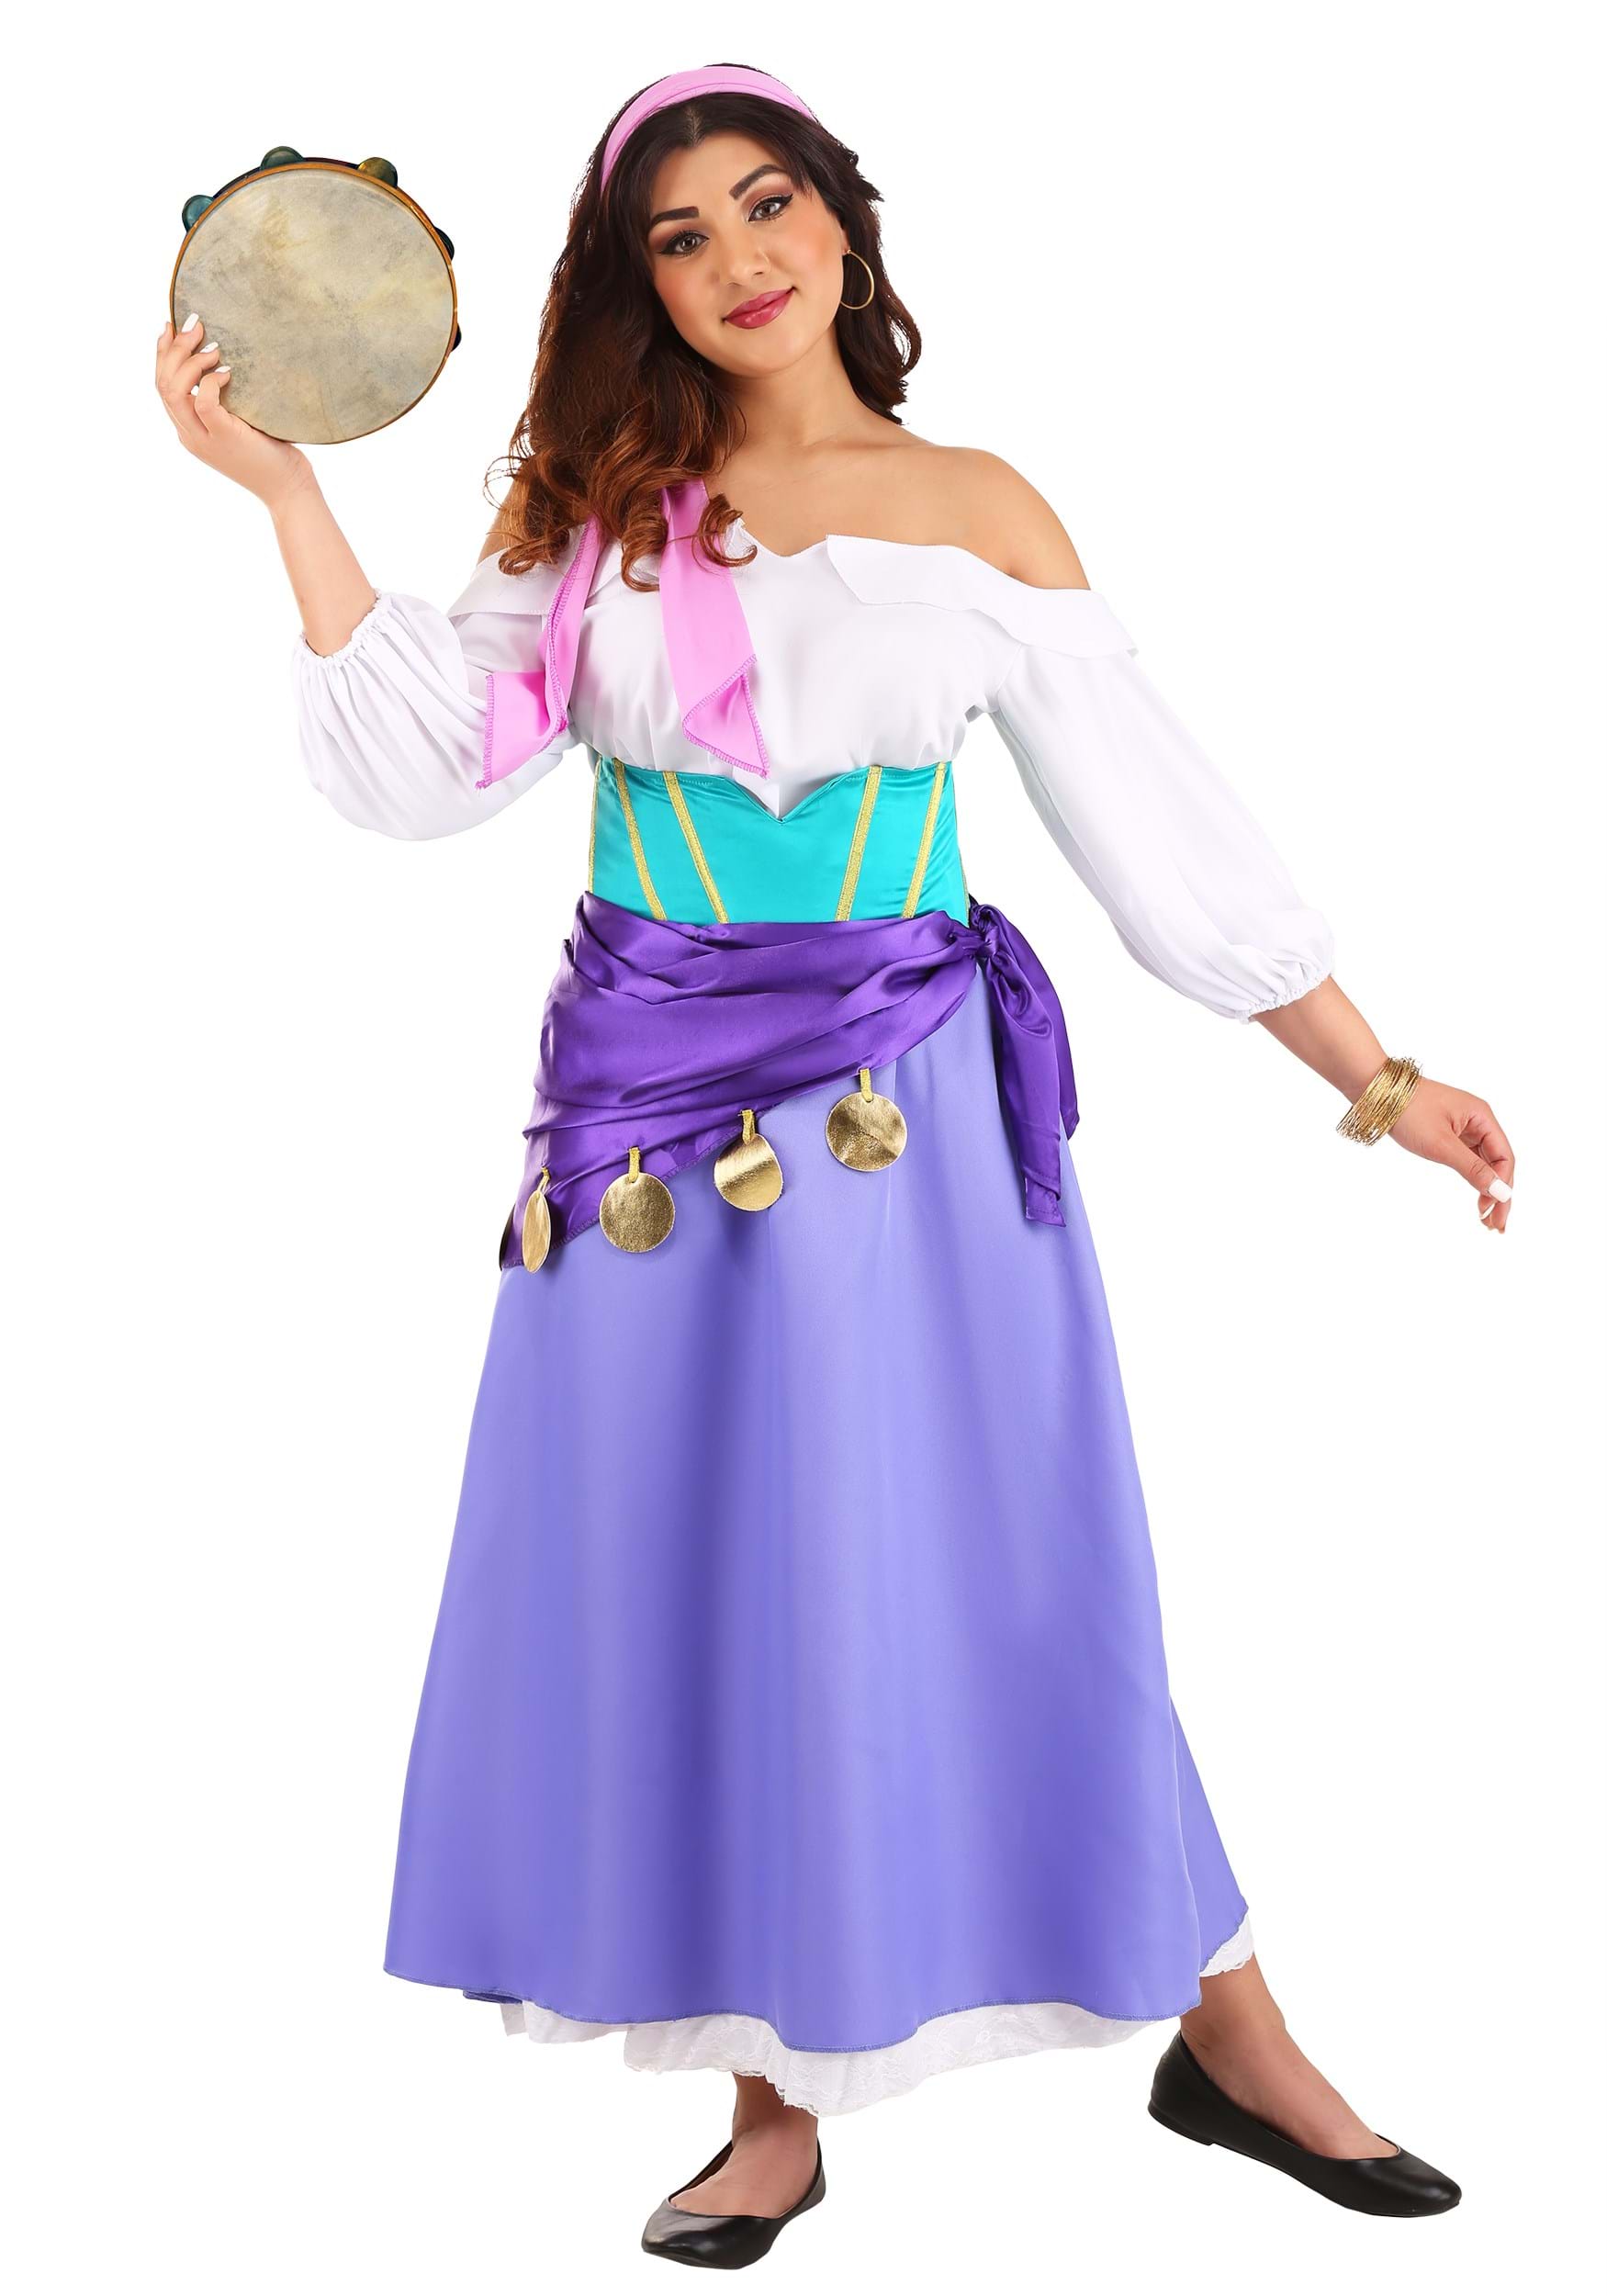 Photos - Fancy Dress Disguise Limited Hunchback of Notre Dame Esmeralda Costume for Women Purpl